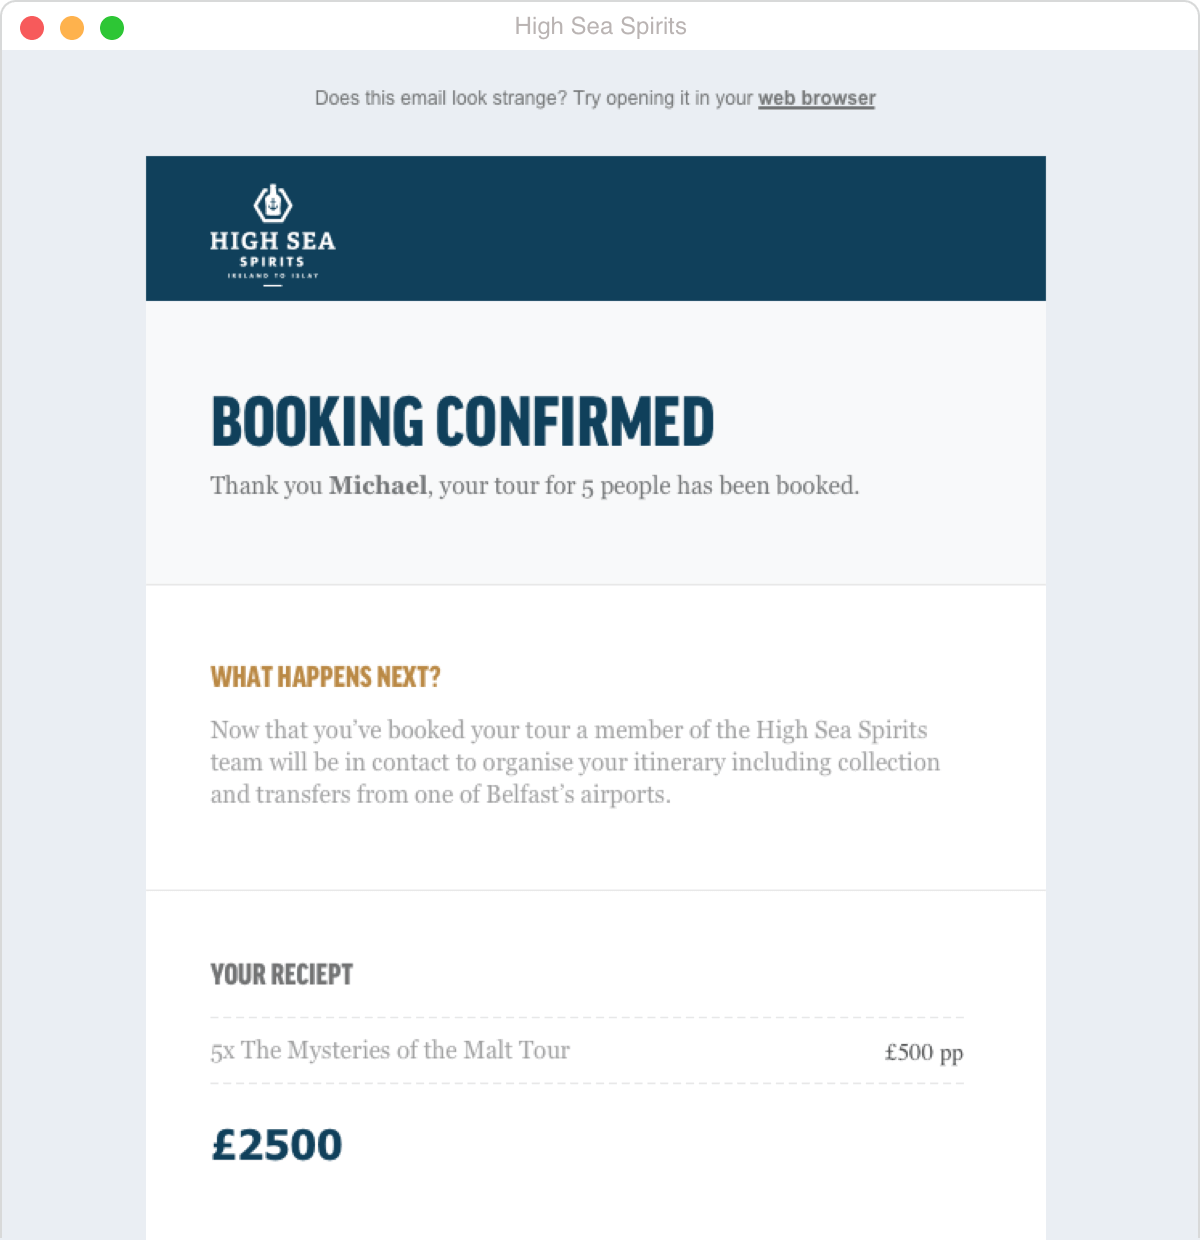 Email Confirmation of High Sea Spirits Booking